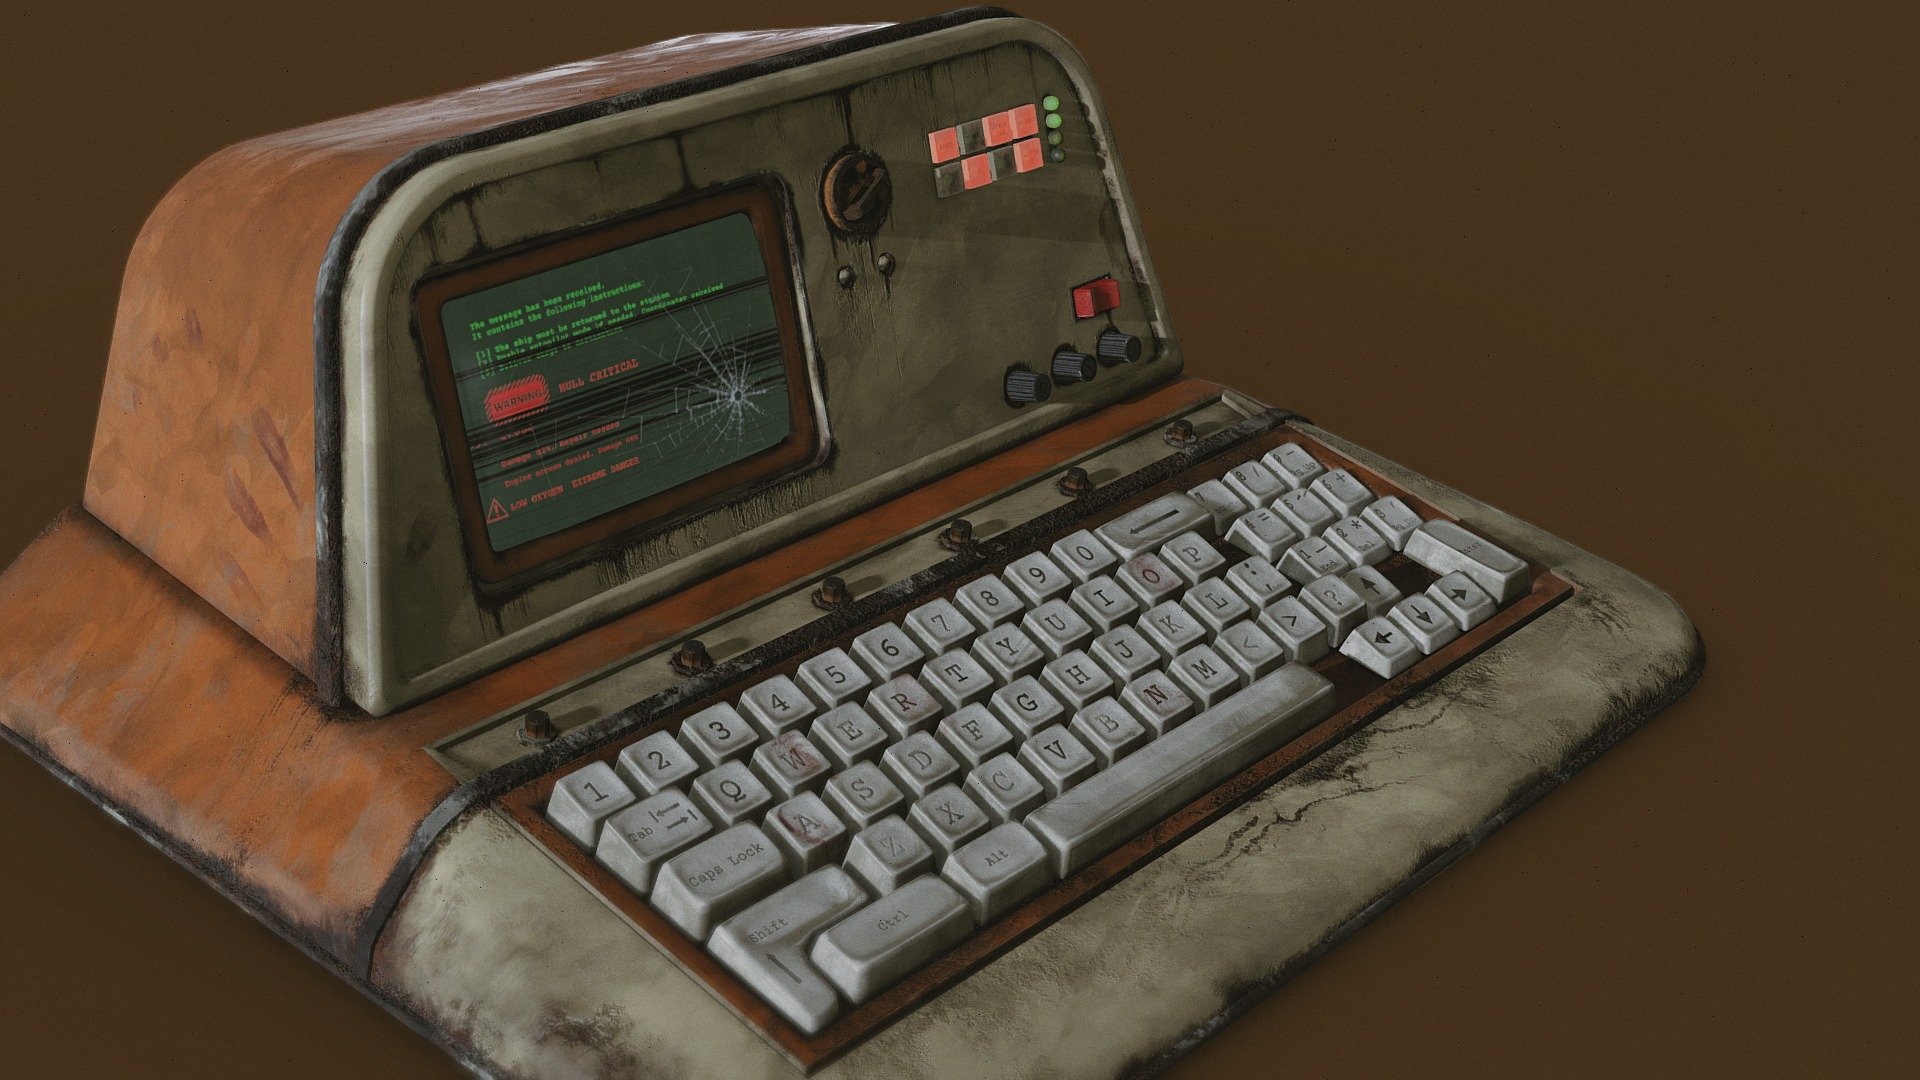 Model study. Old and highly damaged spaceship computer in a si fi retro futuristic style - Old retro-futuristic spaceship computer - Download Free 3D model by Julius (@darlingjulia0) 3d model